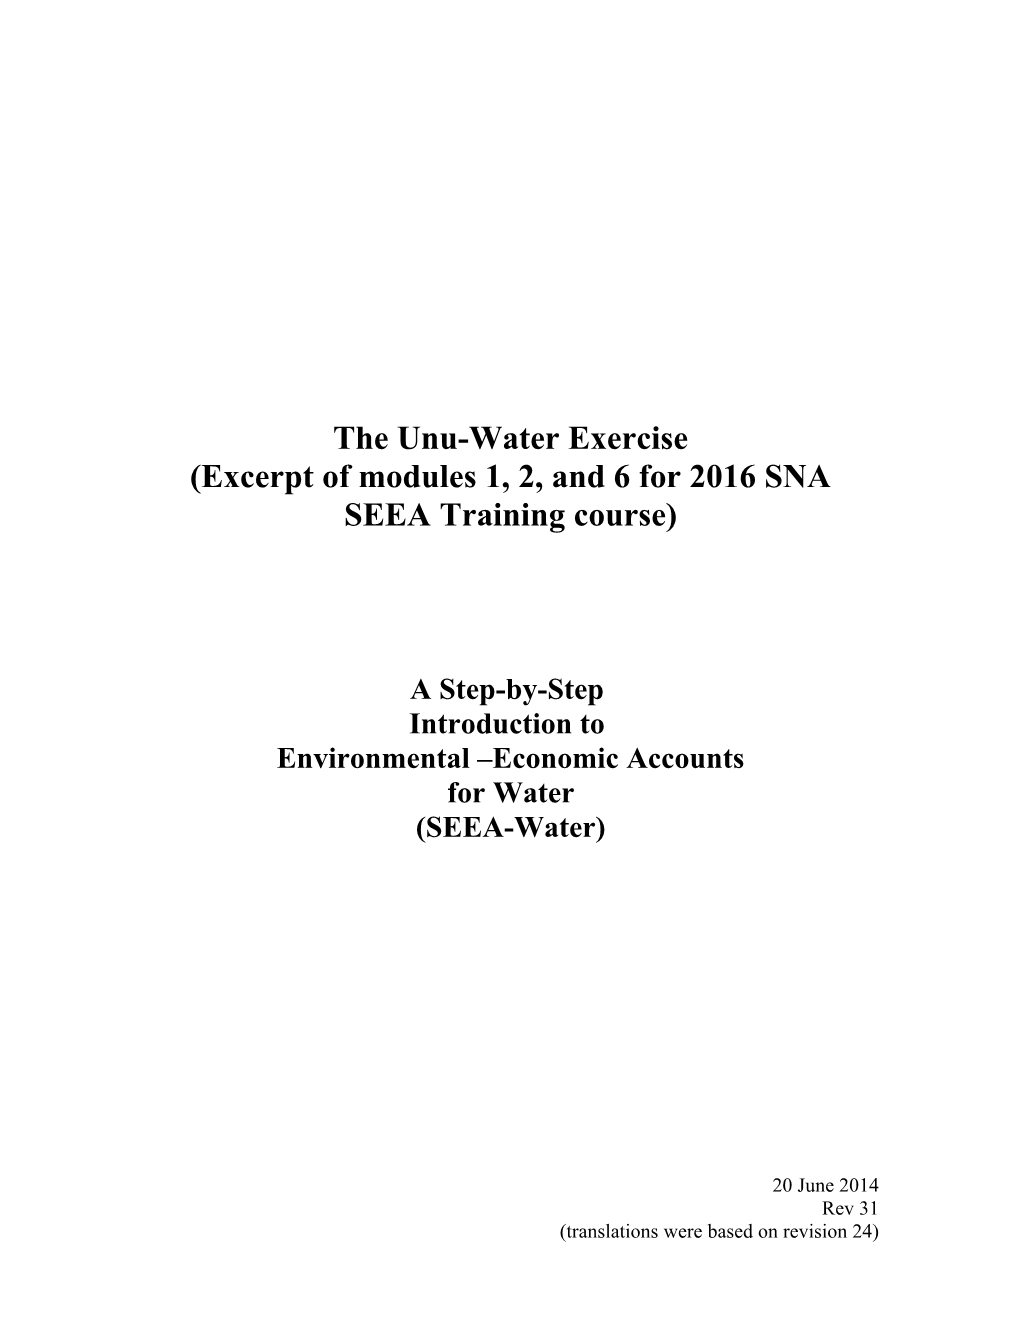 Excerpt of Modules 1, 2, and 6 for 2016 SNA SEEA Training Course